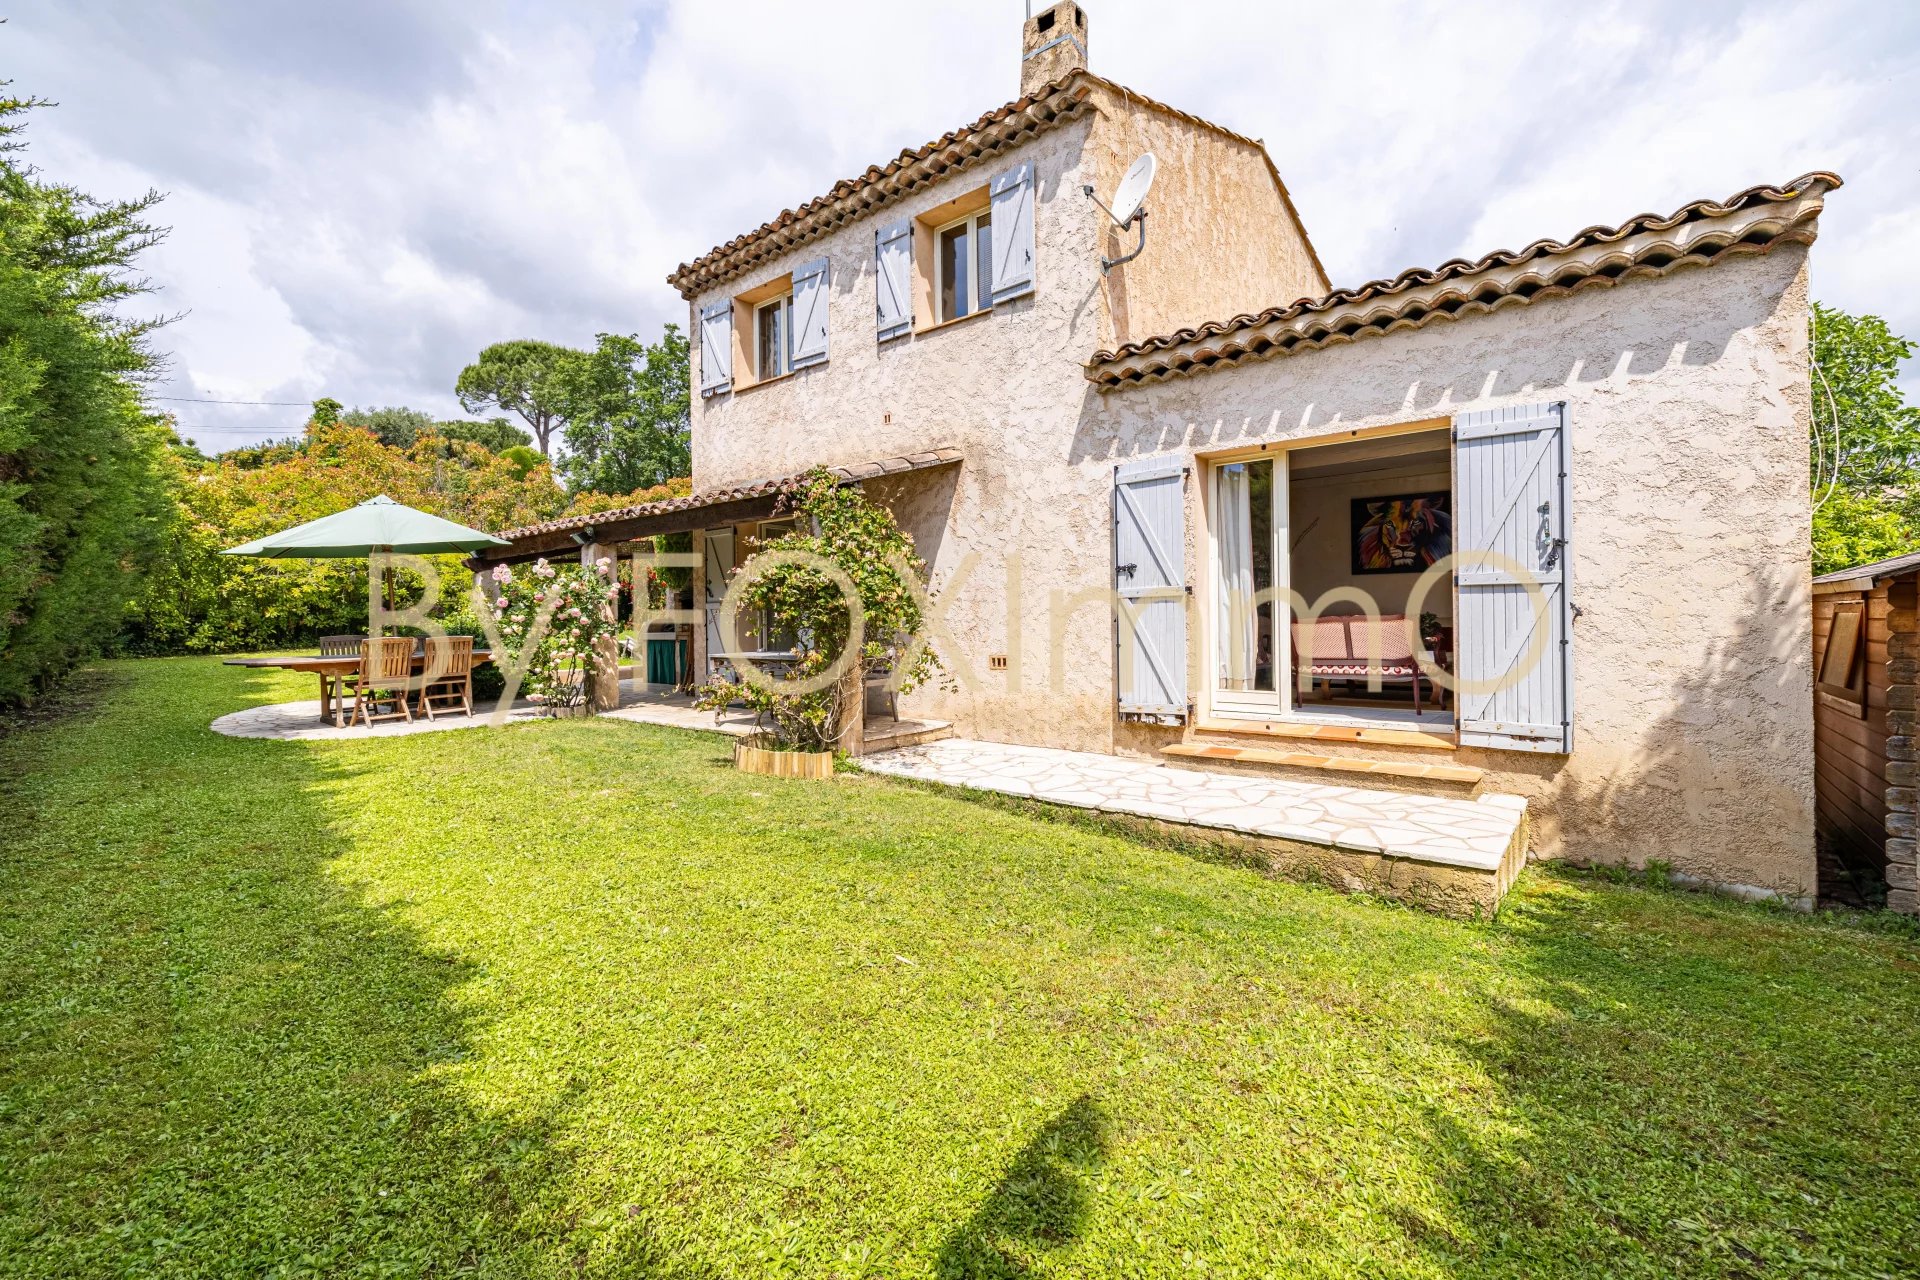 Magnificent 5-room neo-Provencal family house for sale on the Côte d'Azur, set in peaceful, flat grounds